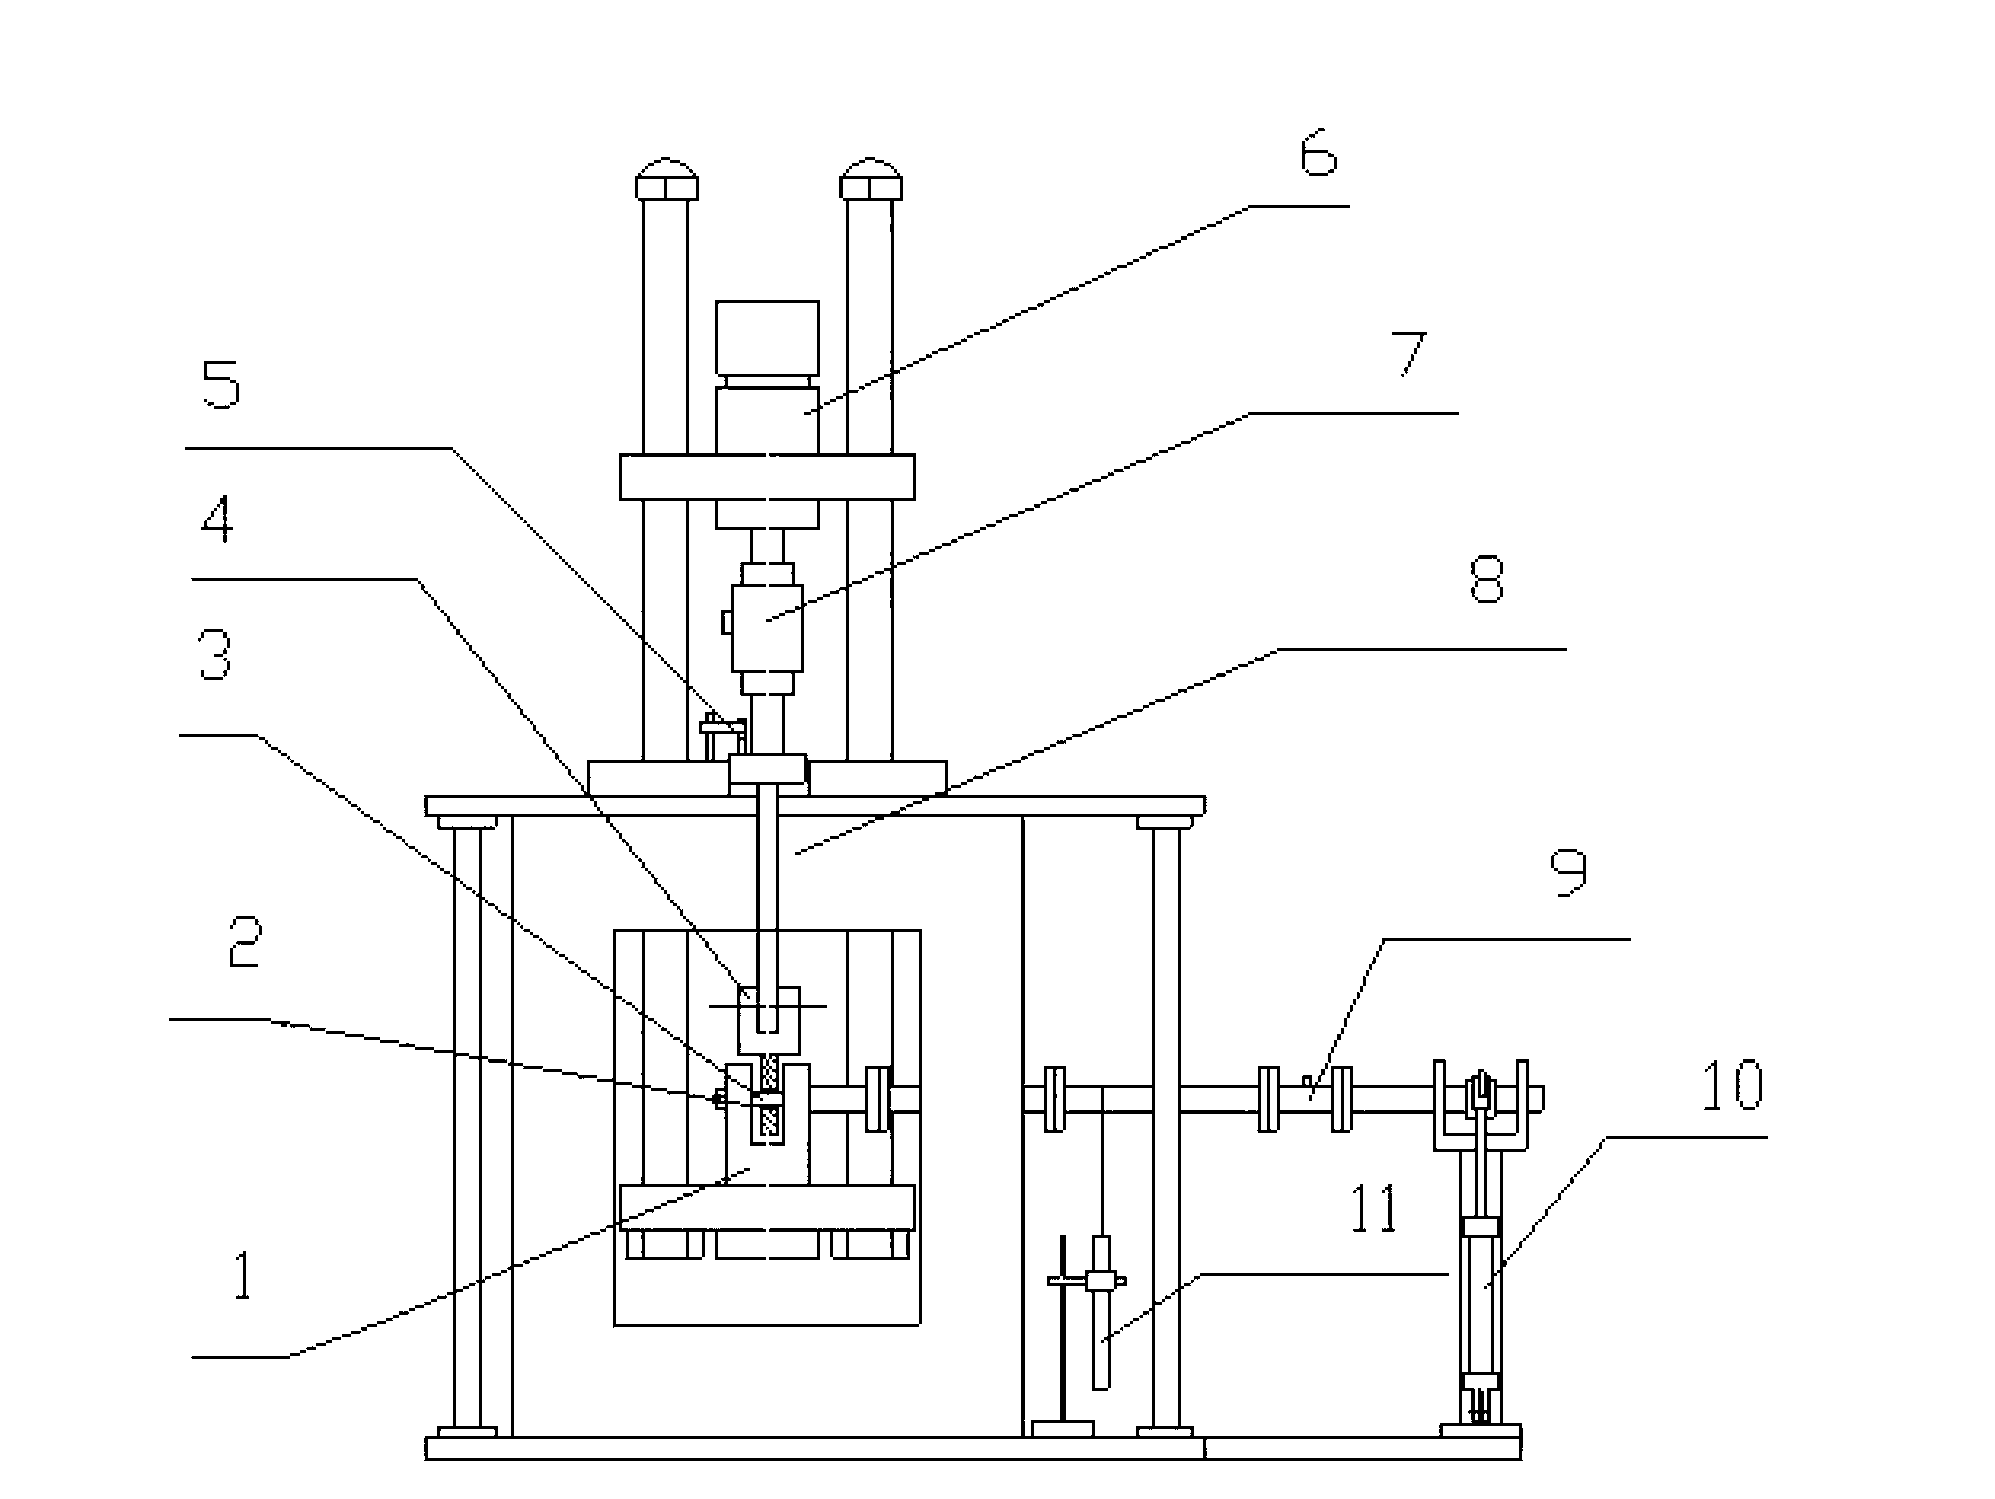 Apparatus used for bearing wearing test